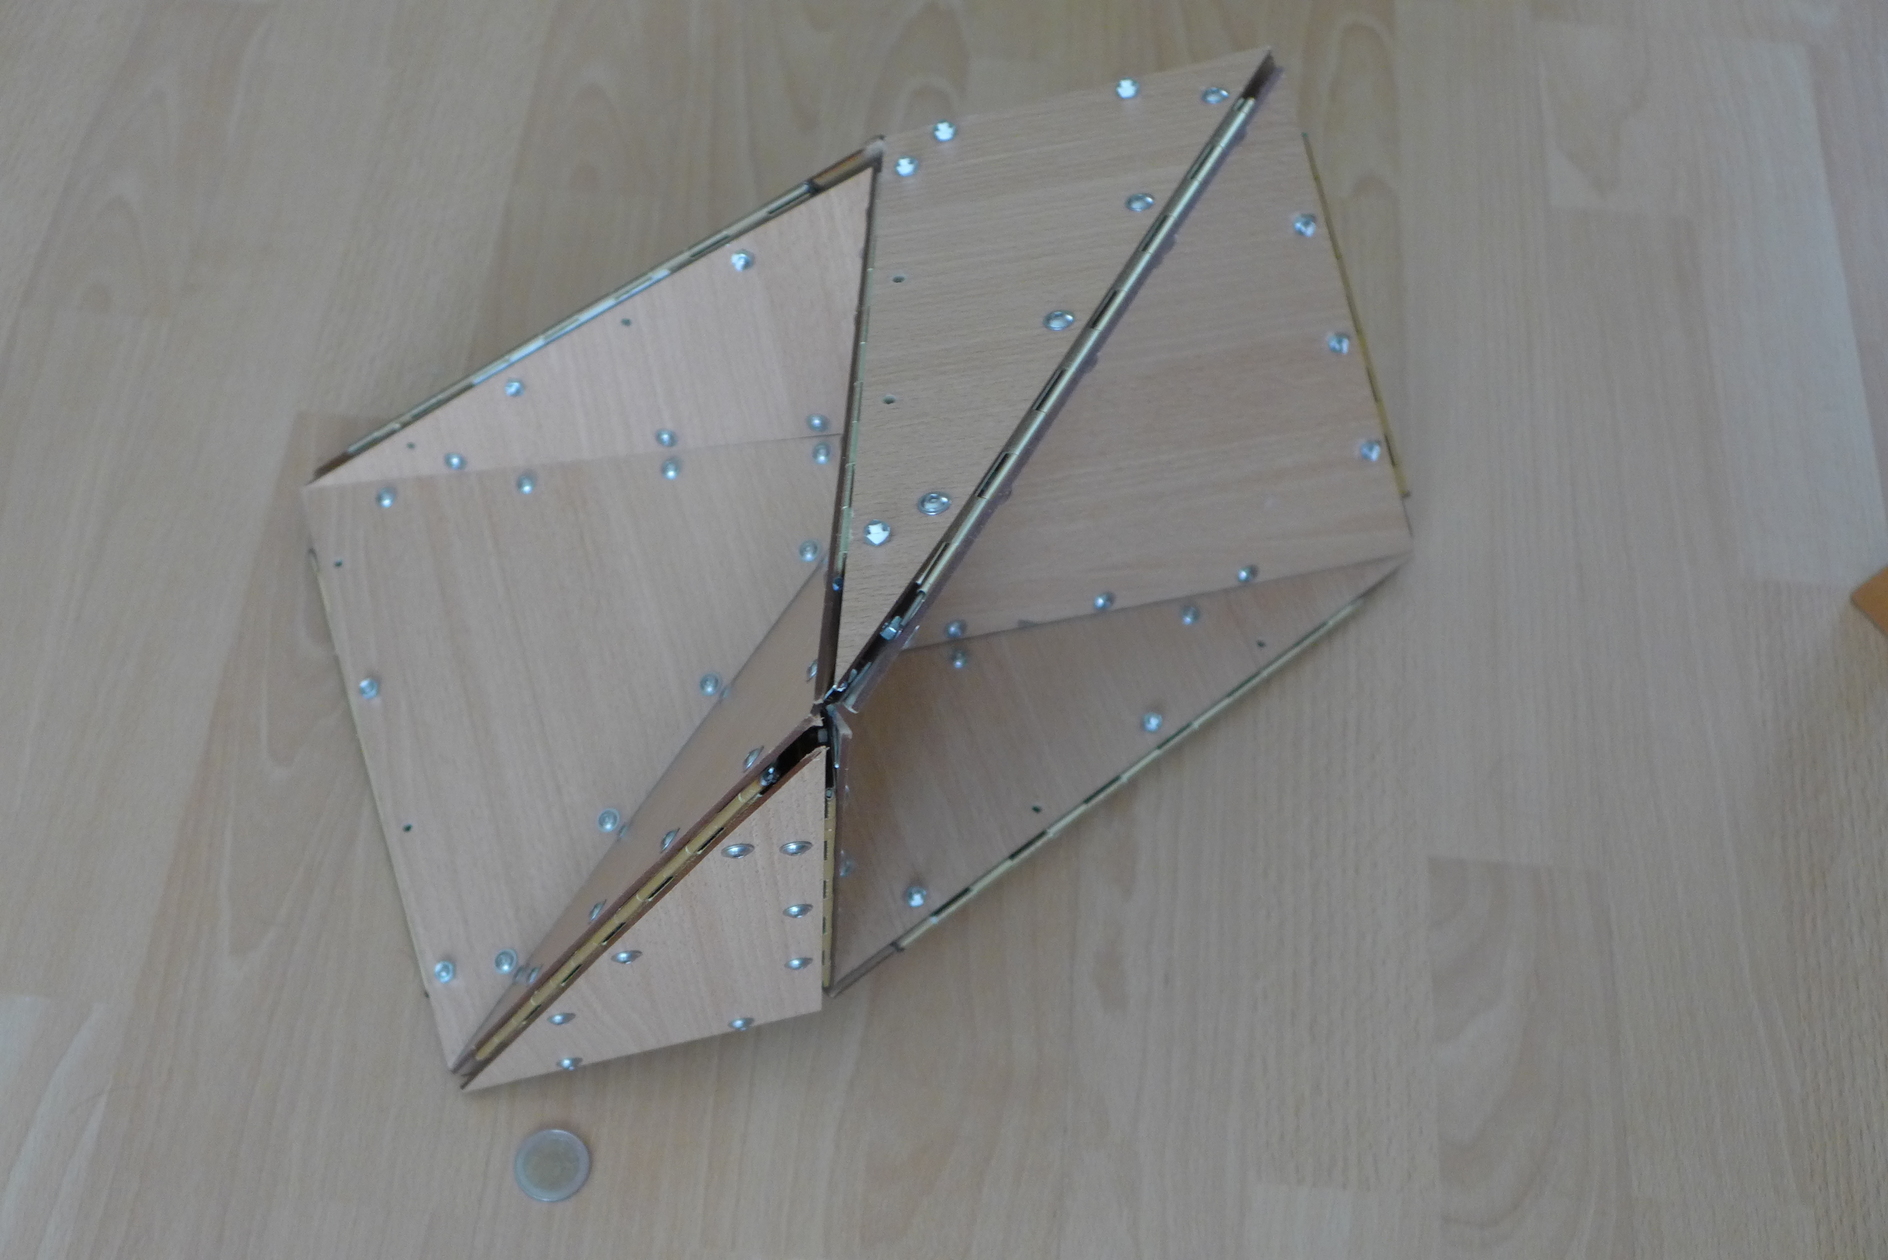 View 1 of the big polyhedron model